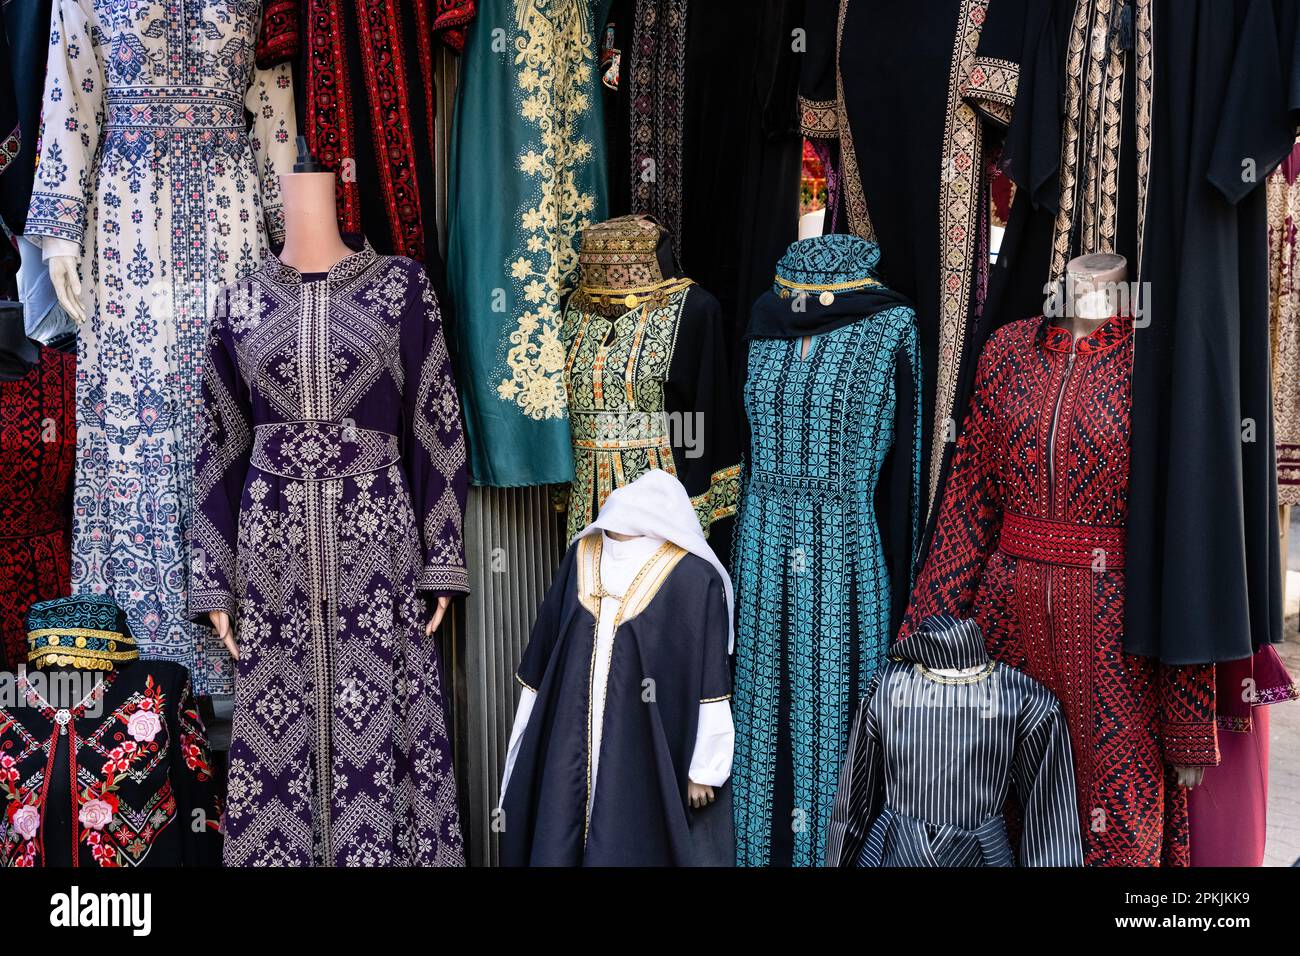 Traditional Jordanian Women's Abaya Dresses Colorfully Embroidered at a Shop in Amman, jordan Stock Photo